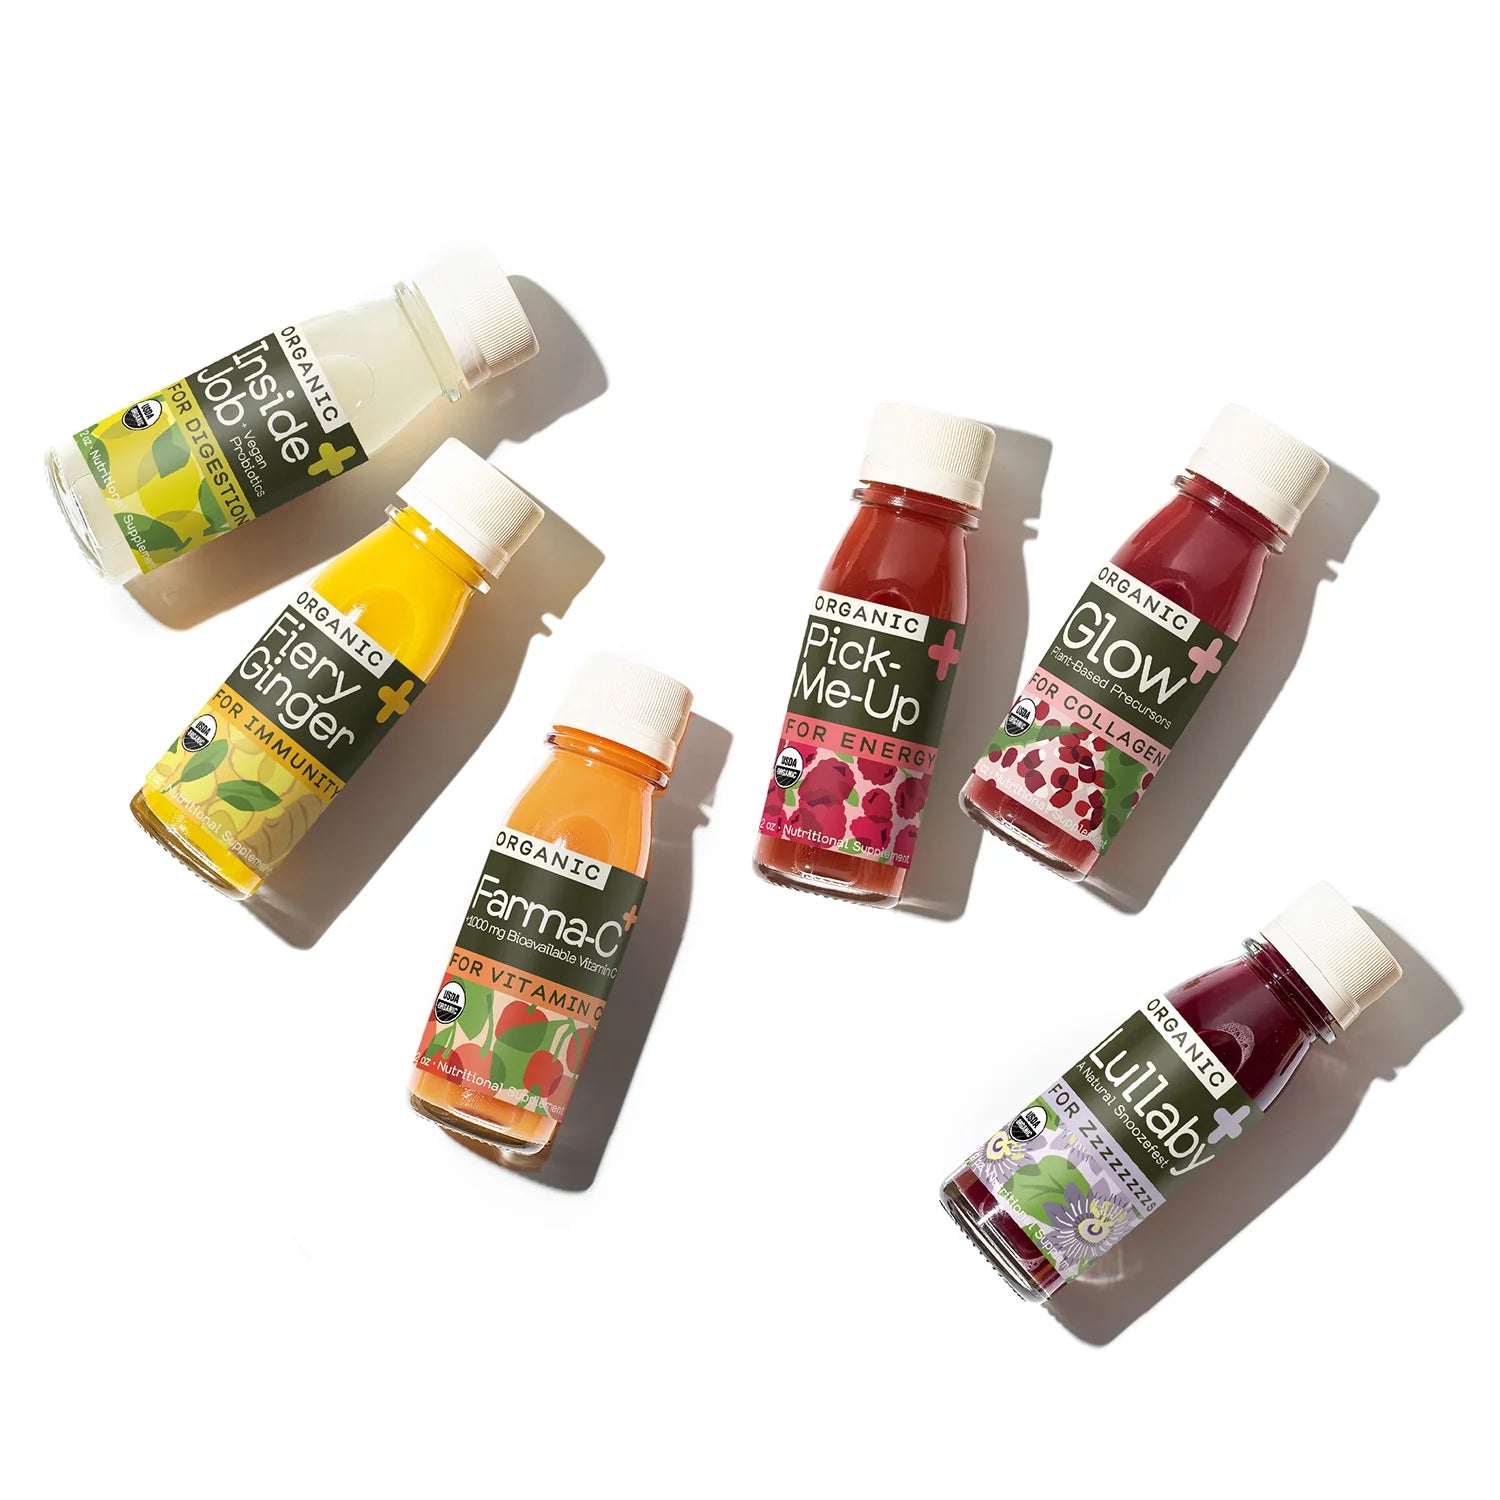 Greenhouse Juices - Shoot or Dilute